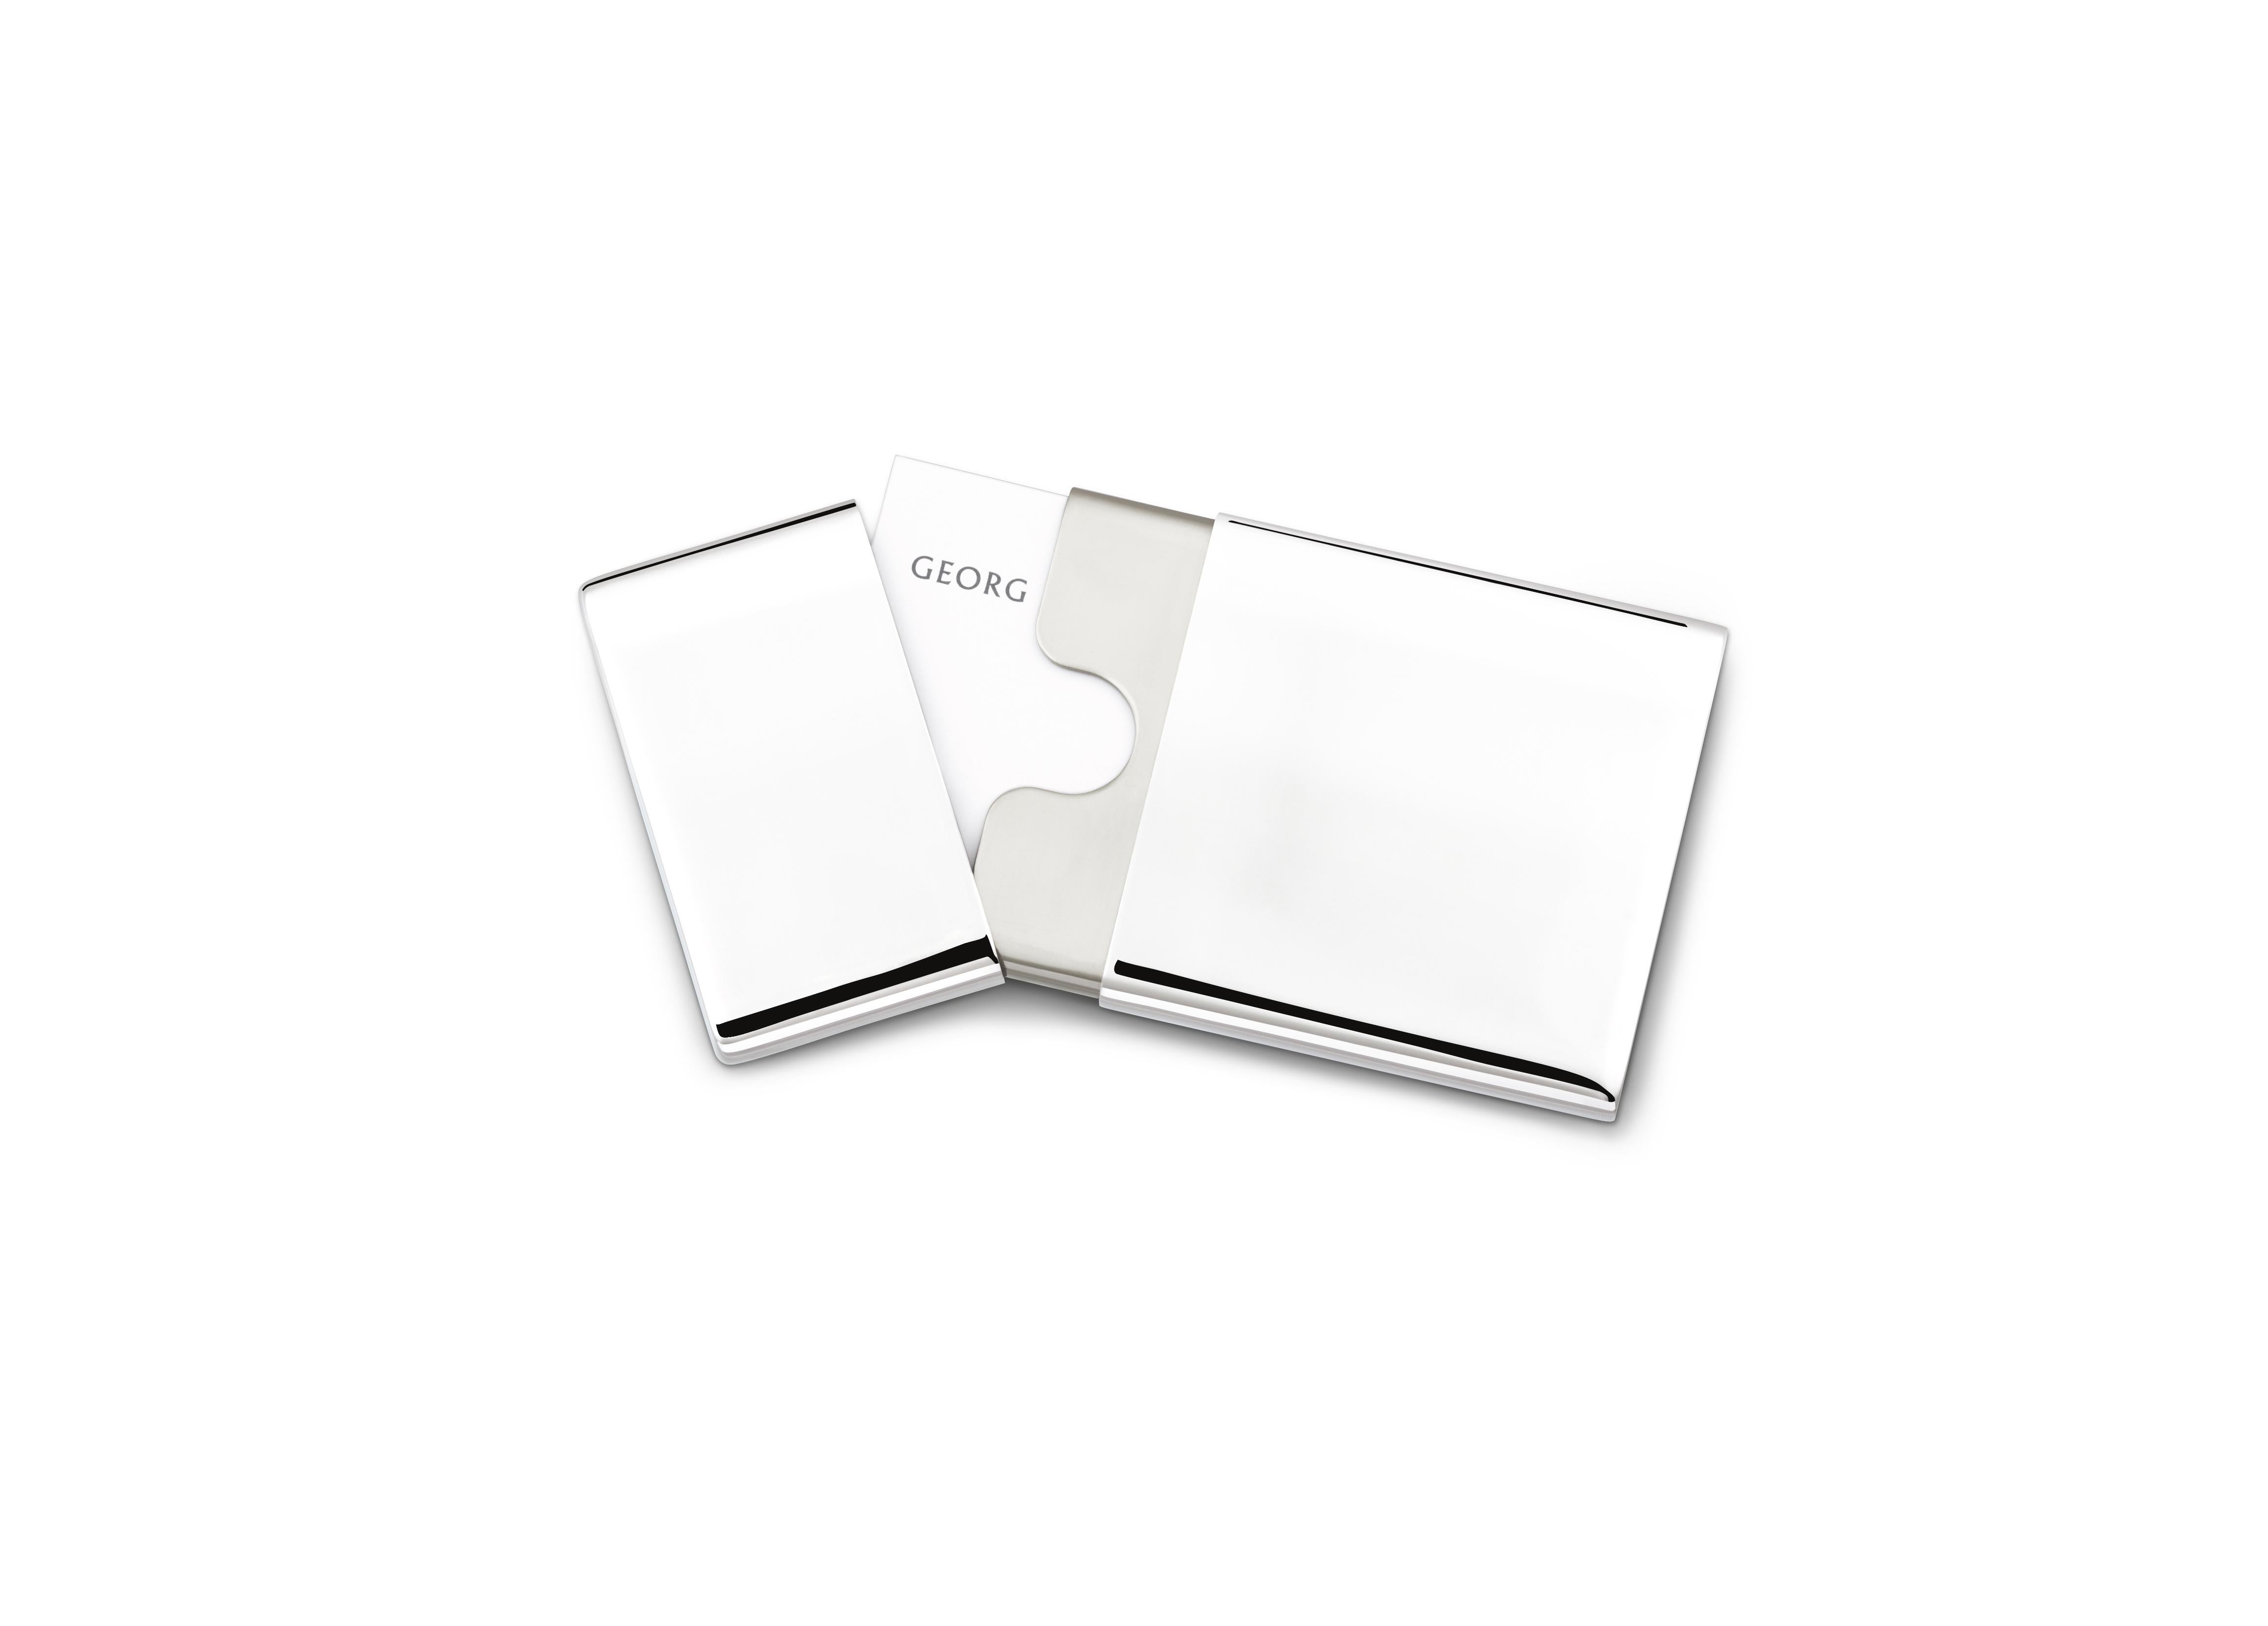 Sleek and elegant yet highly functional and easy to use, this card holder is the perfect accessory for the modern lifestyle on the go.